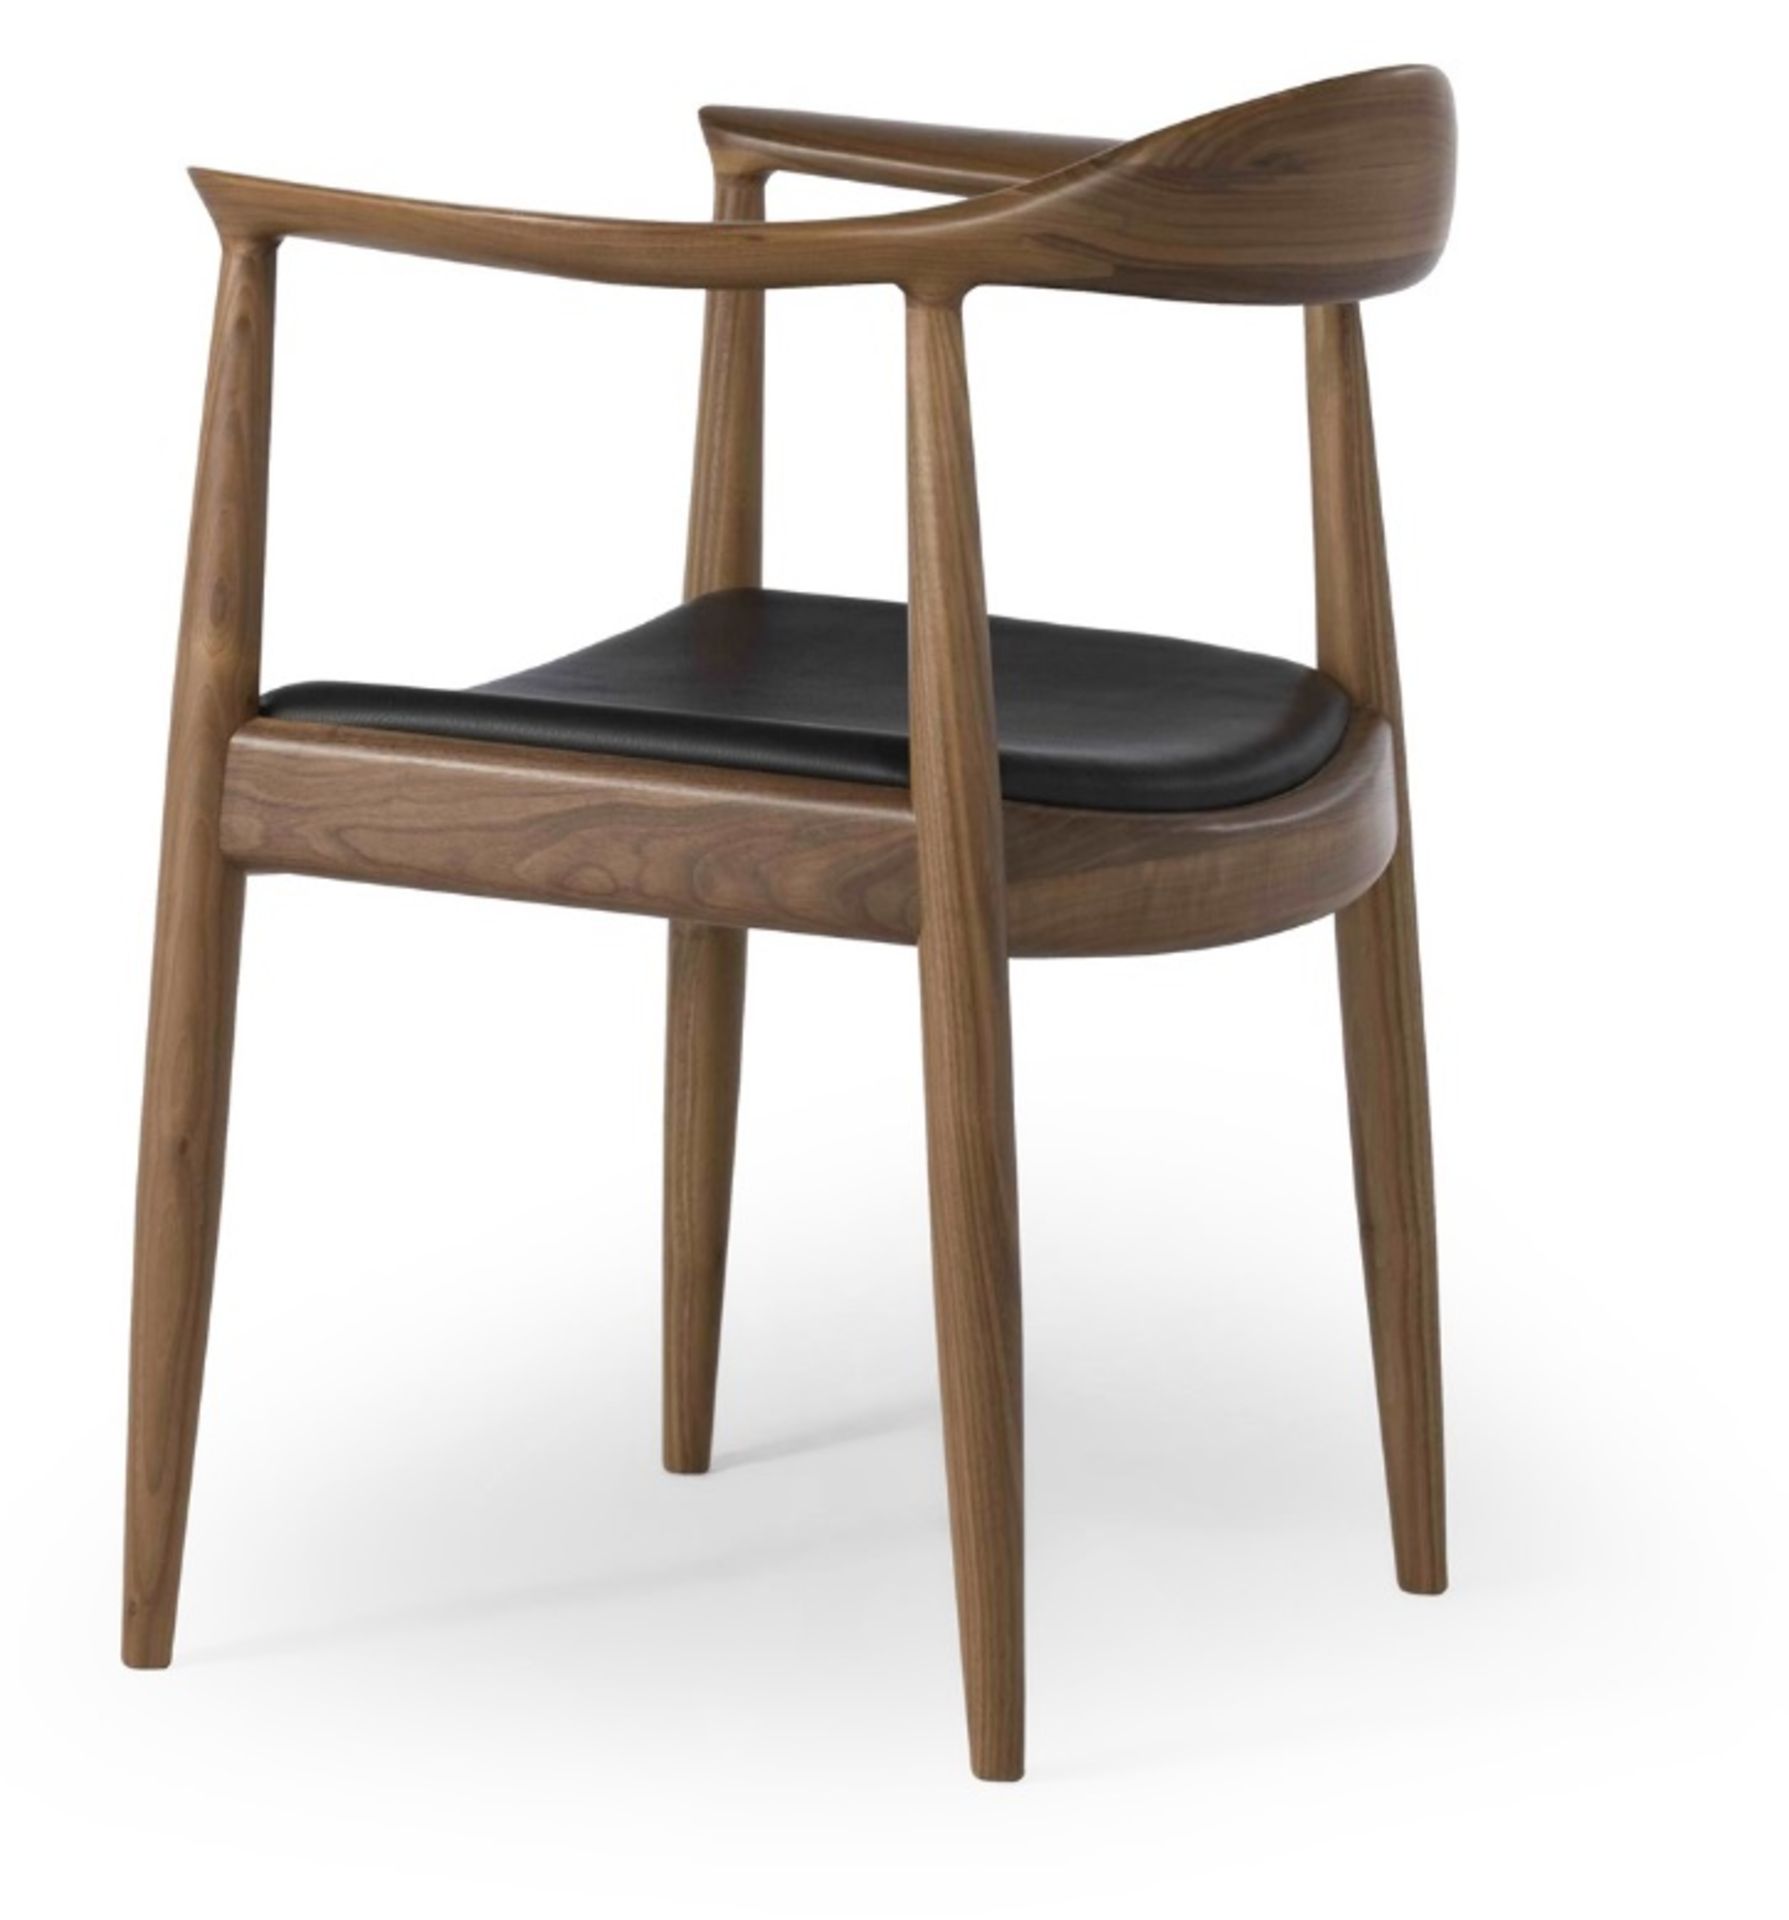 6 x Hans-j Wegner Inspired Dining Chairs In Walnut - New & Boxed- CL508 - Location: Altrincham WA14 - Image 4 of 5